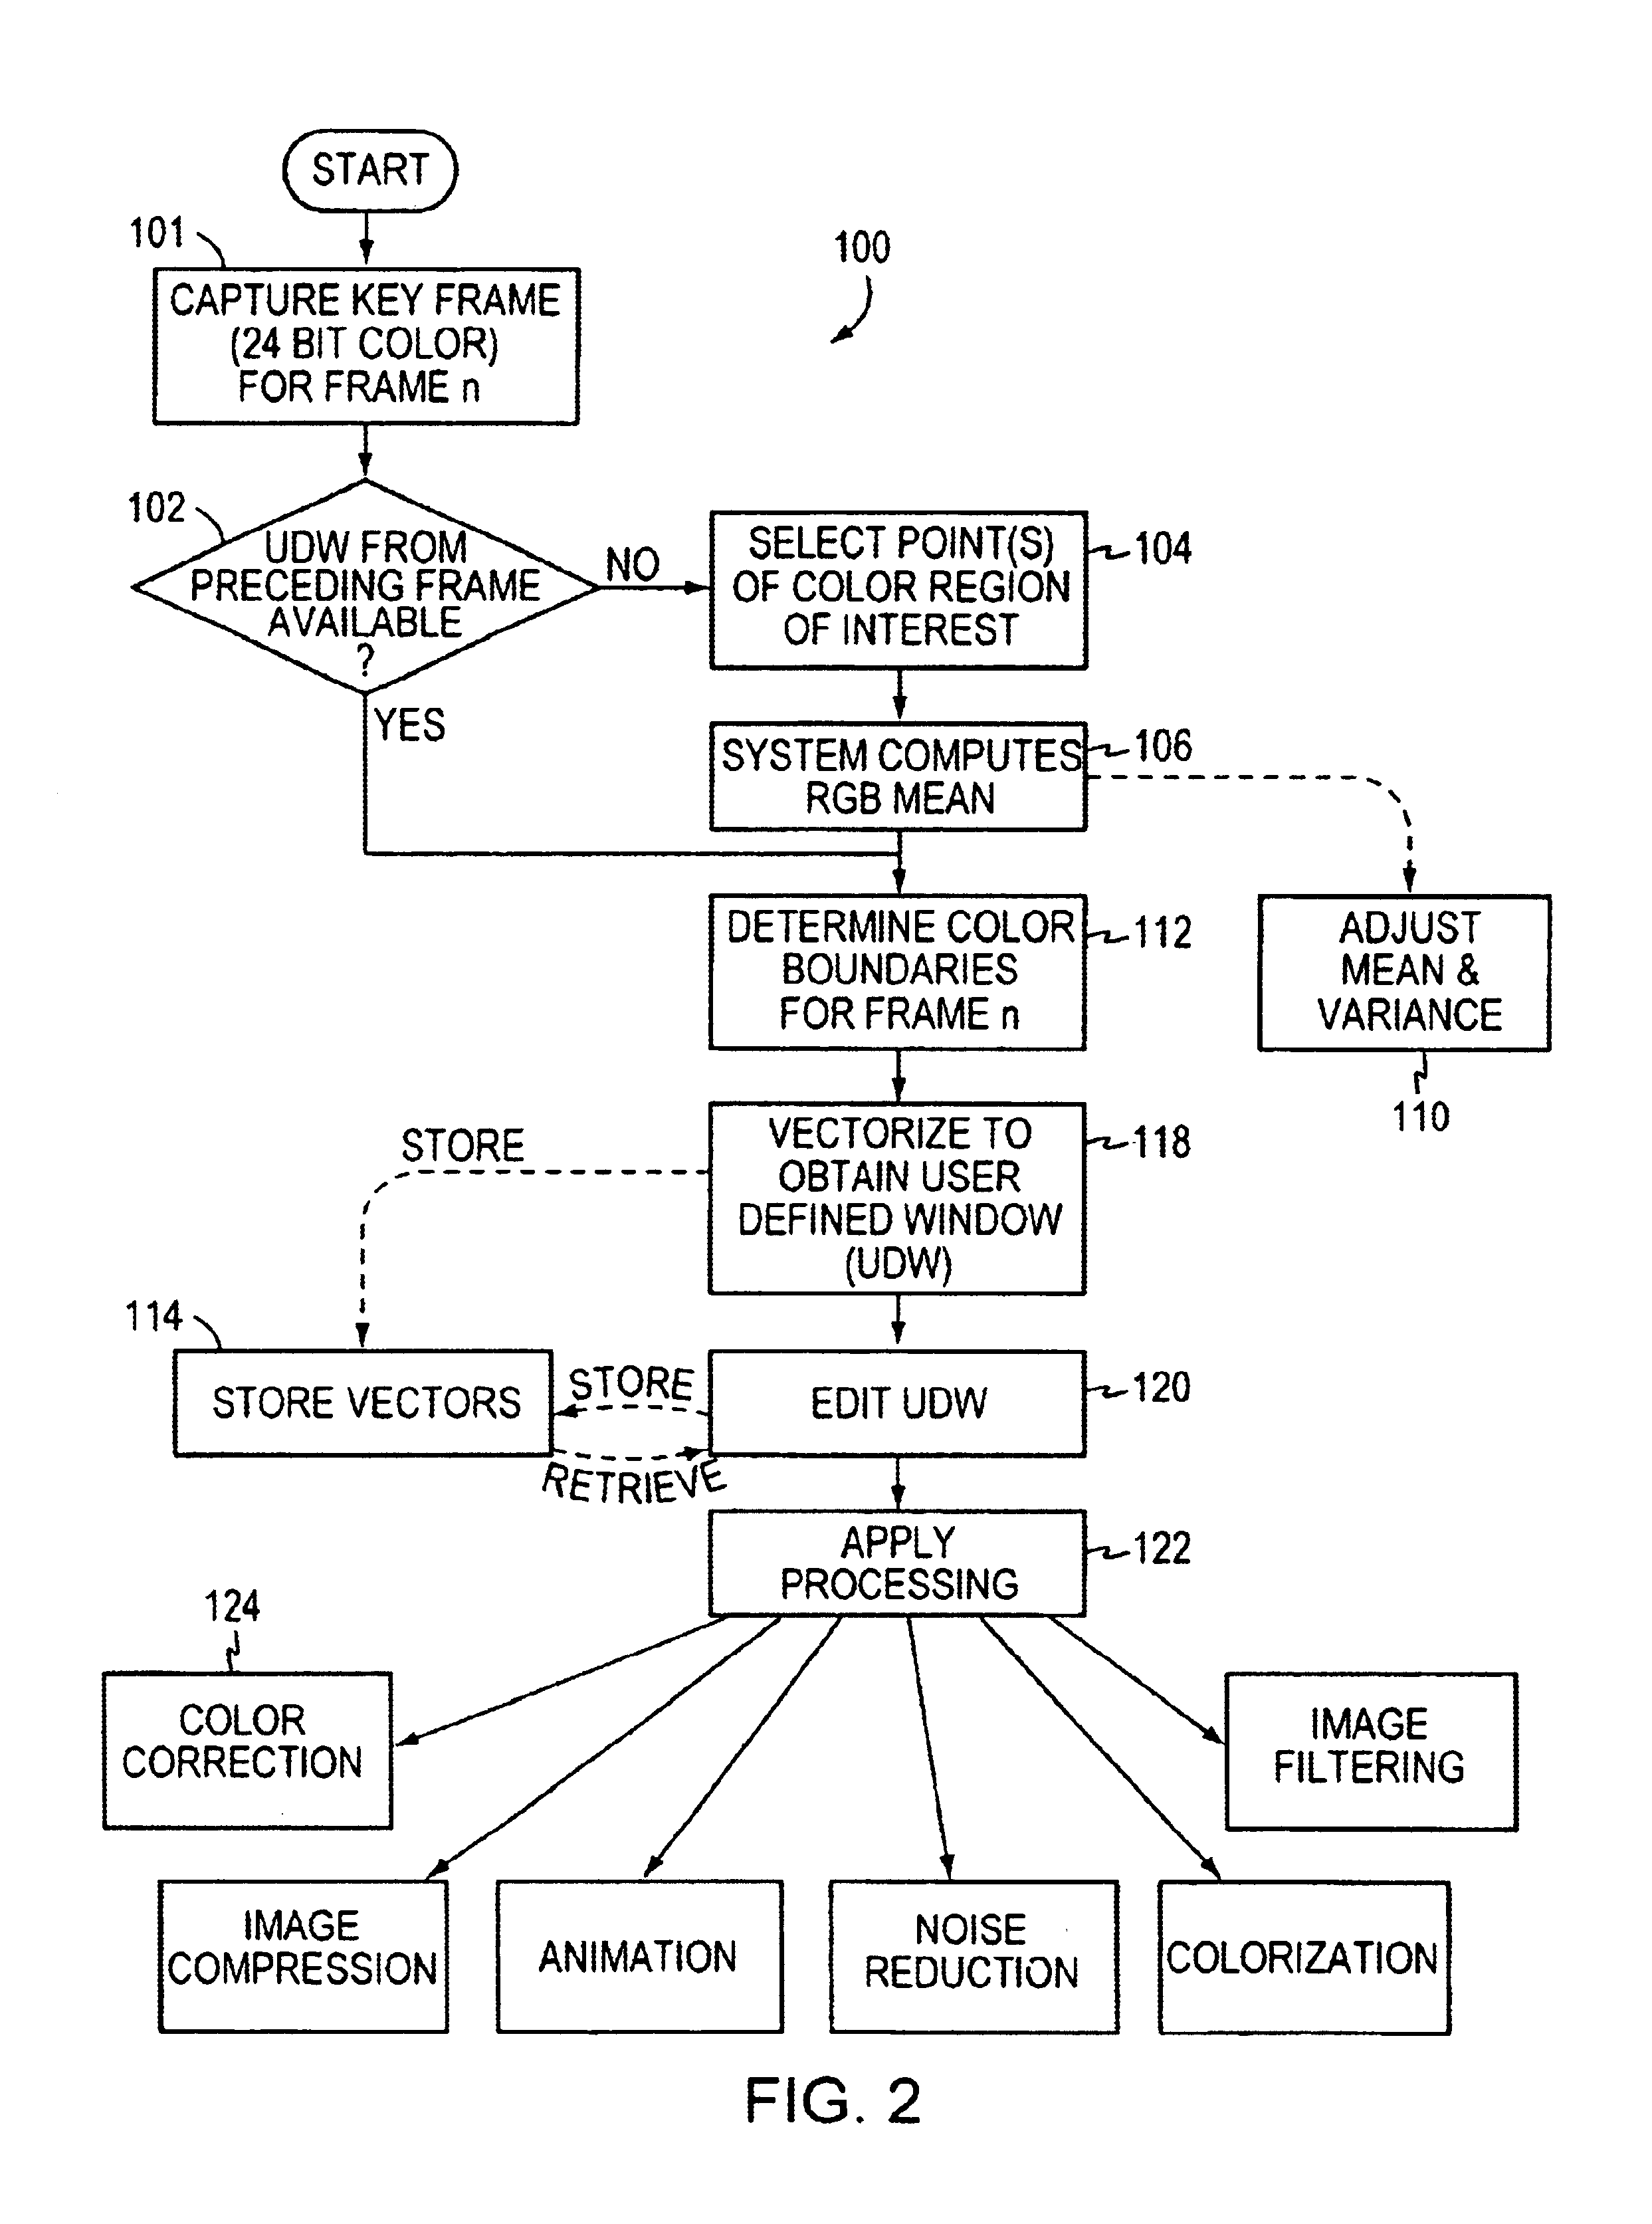 Automatic region of interest tracking for a color correction system